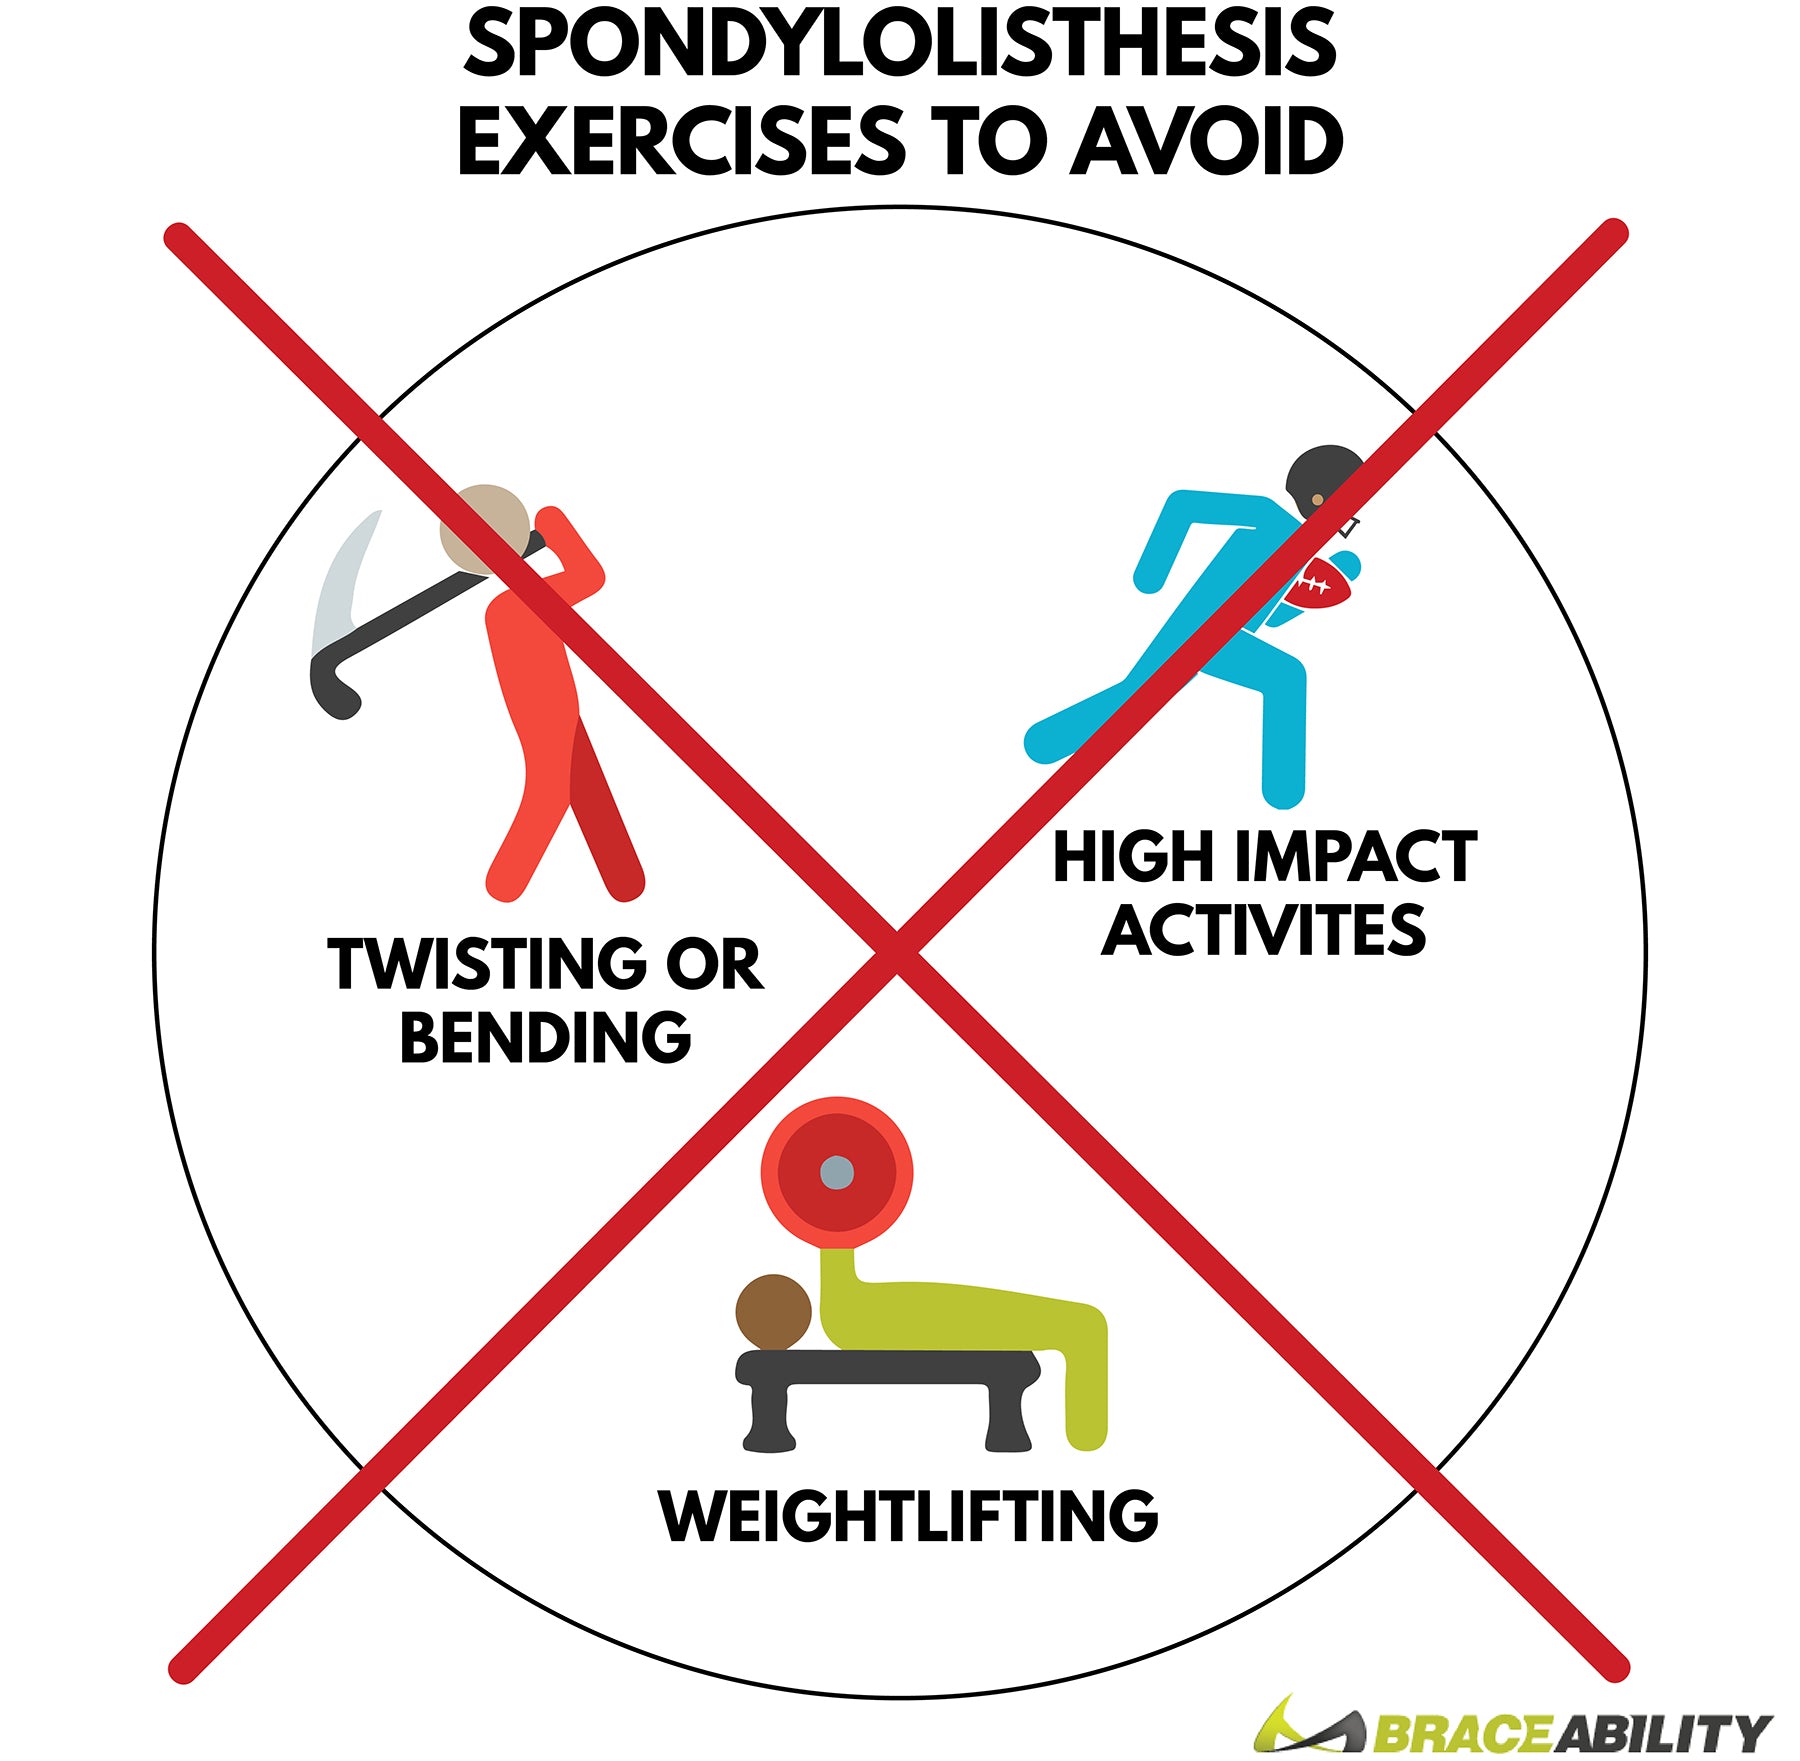 Avoid these three exercises to prevent spondylolisthesis from happening or getting worse